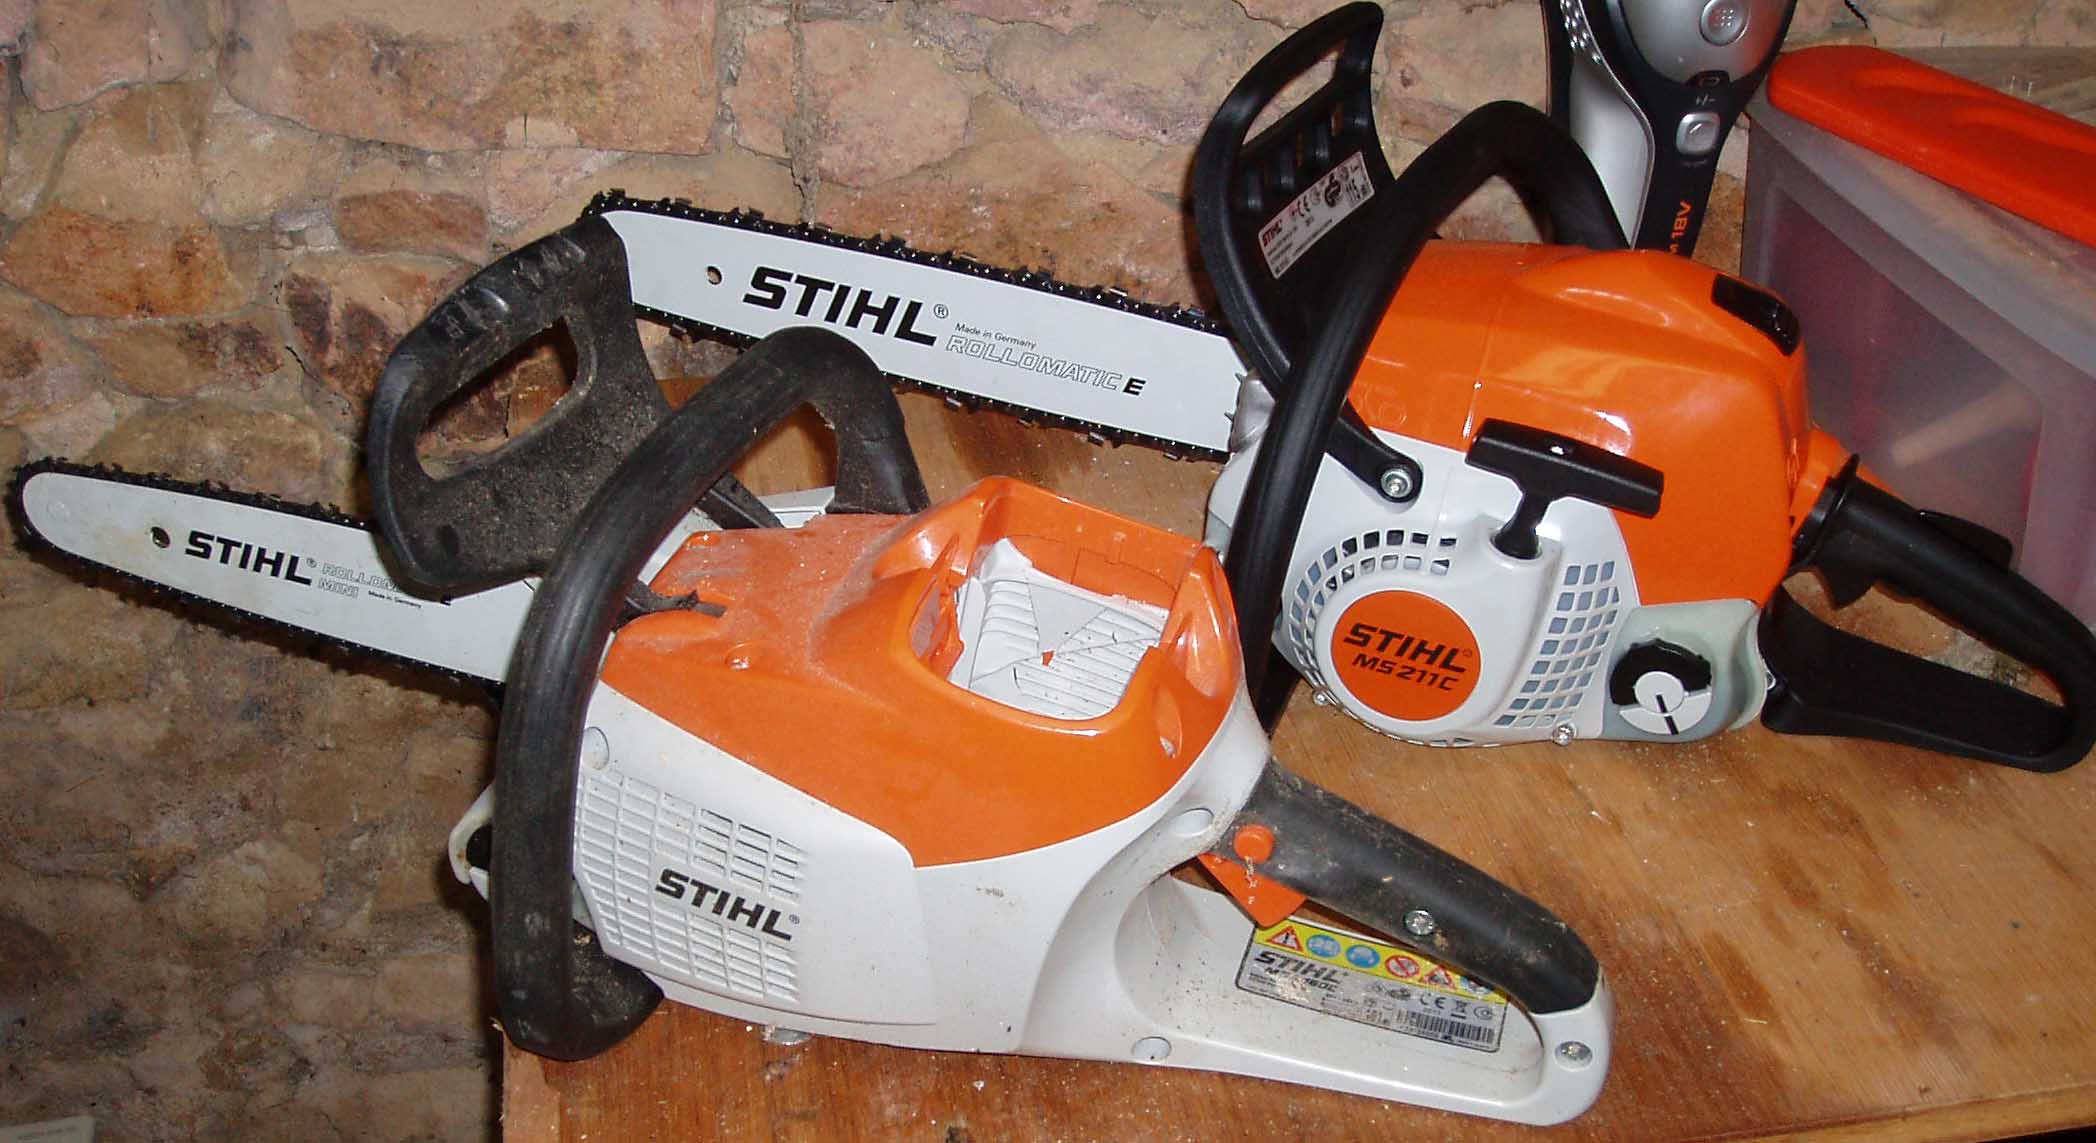 Image of His and hers chainsaws